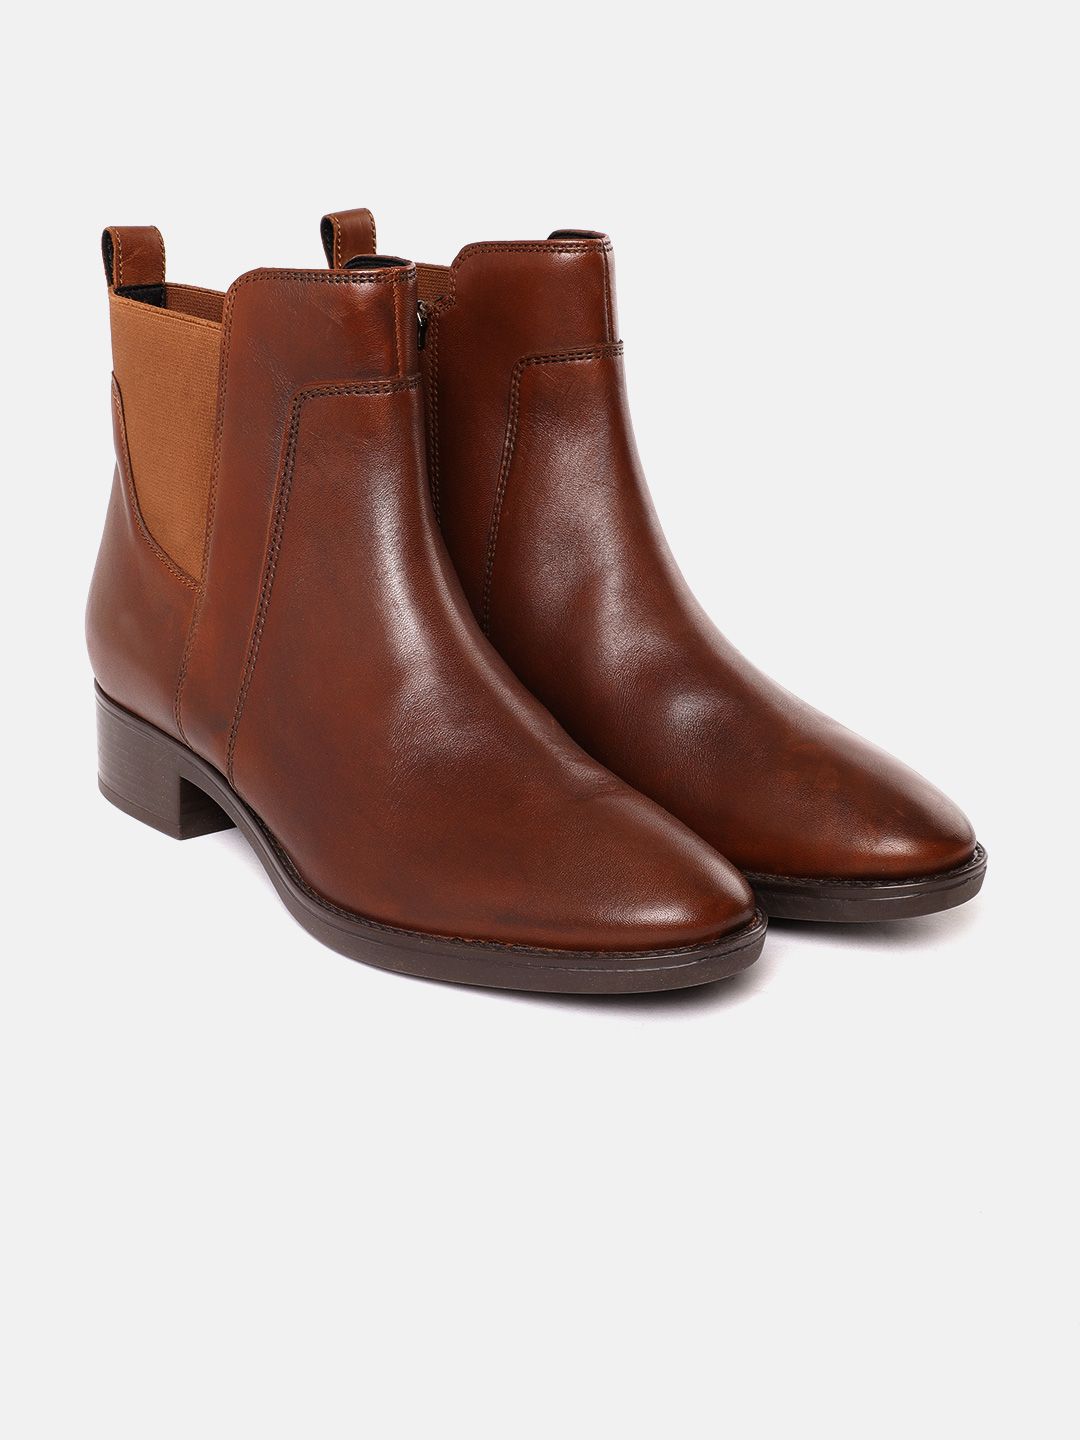 Geox Women Brown Leather Chelsea Boots Price in India